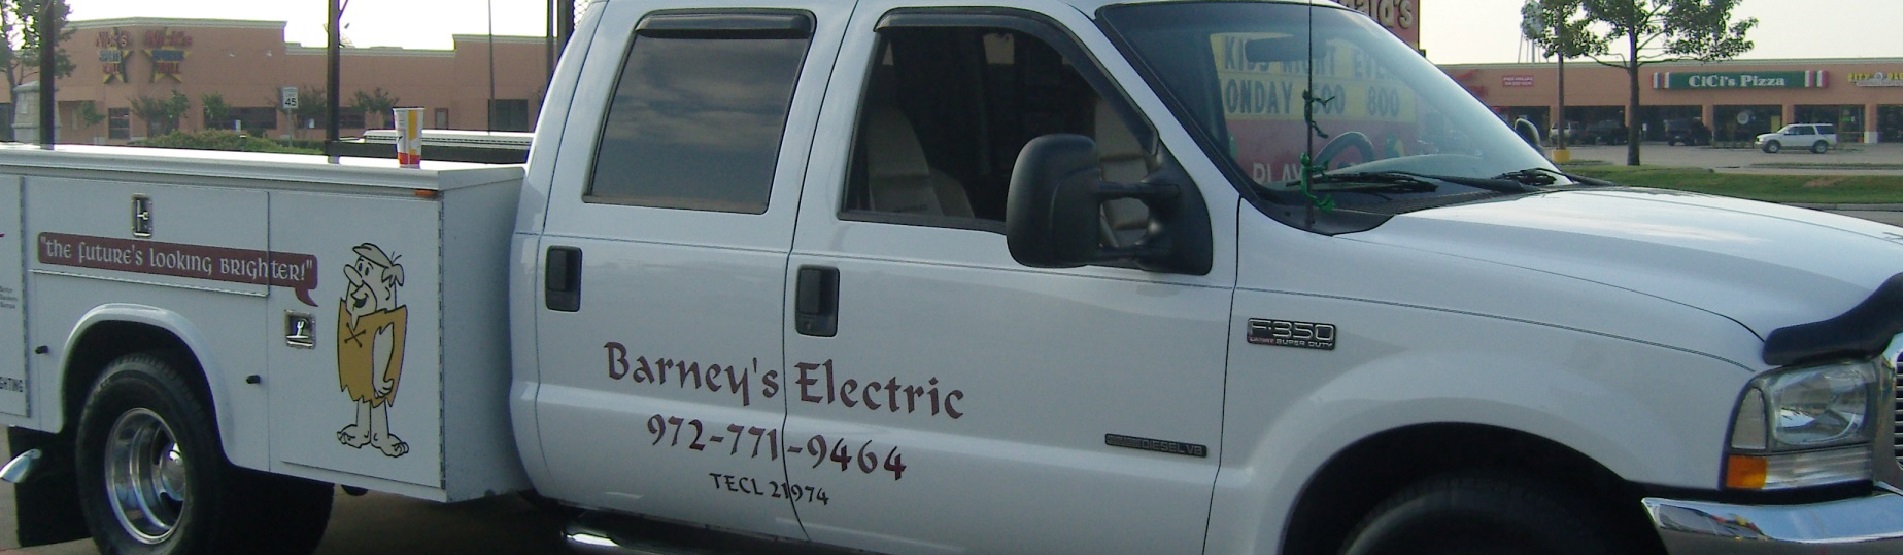 Electrician Sunnyvale TX Barney's Electric Full Service Electrician Residential Commercial Retail and New Construction Wiring Repair Installation Service 24 Hour Emergency Services Master Electrician Rockwall Texas